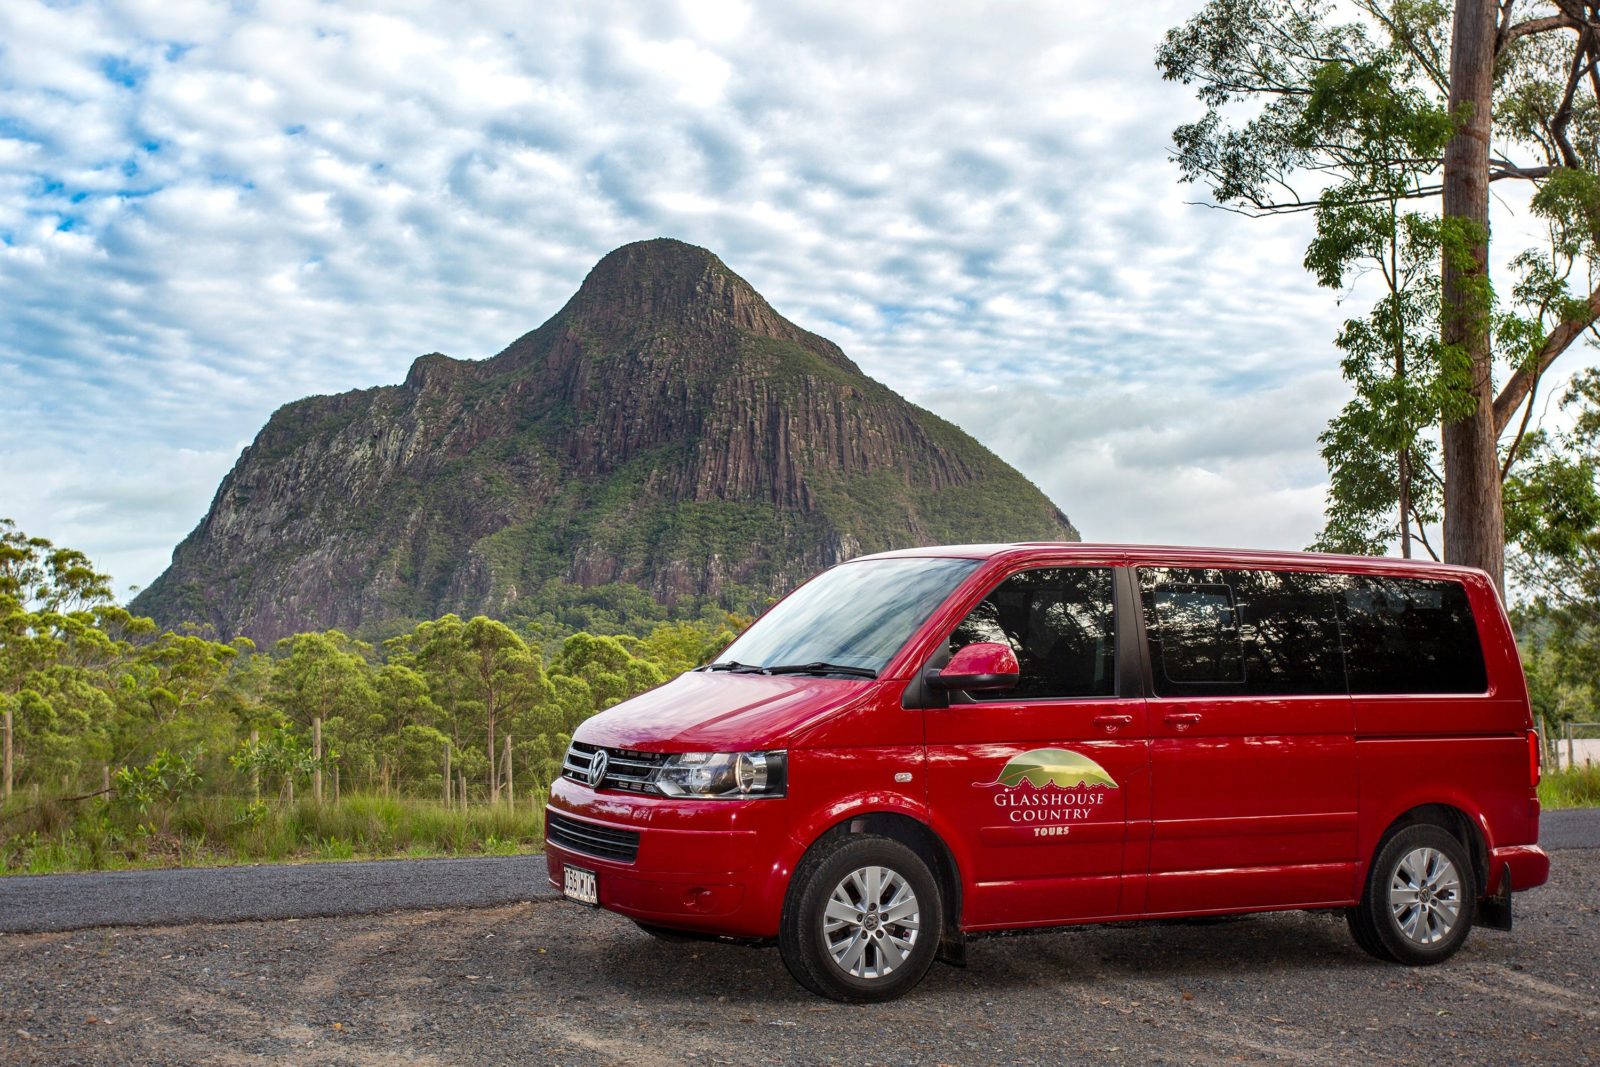 Image show the Glasshouse Country Tours bus with a view of Mt Beerwah in the background